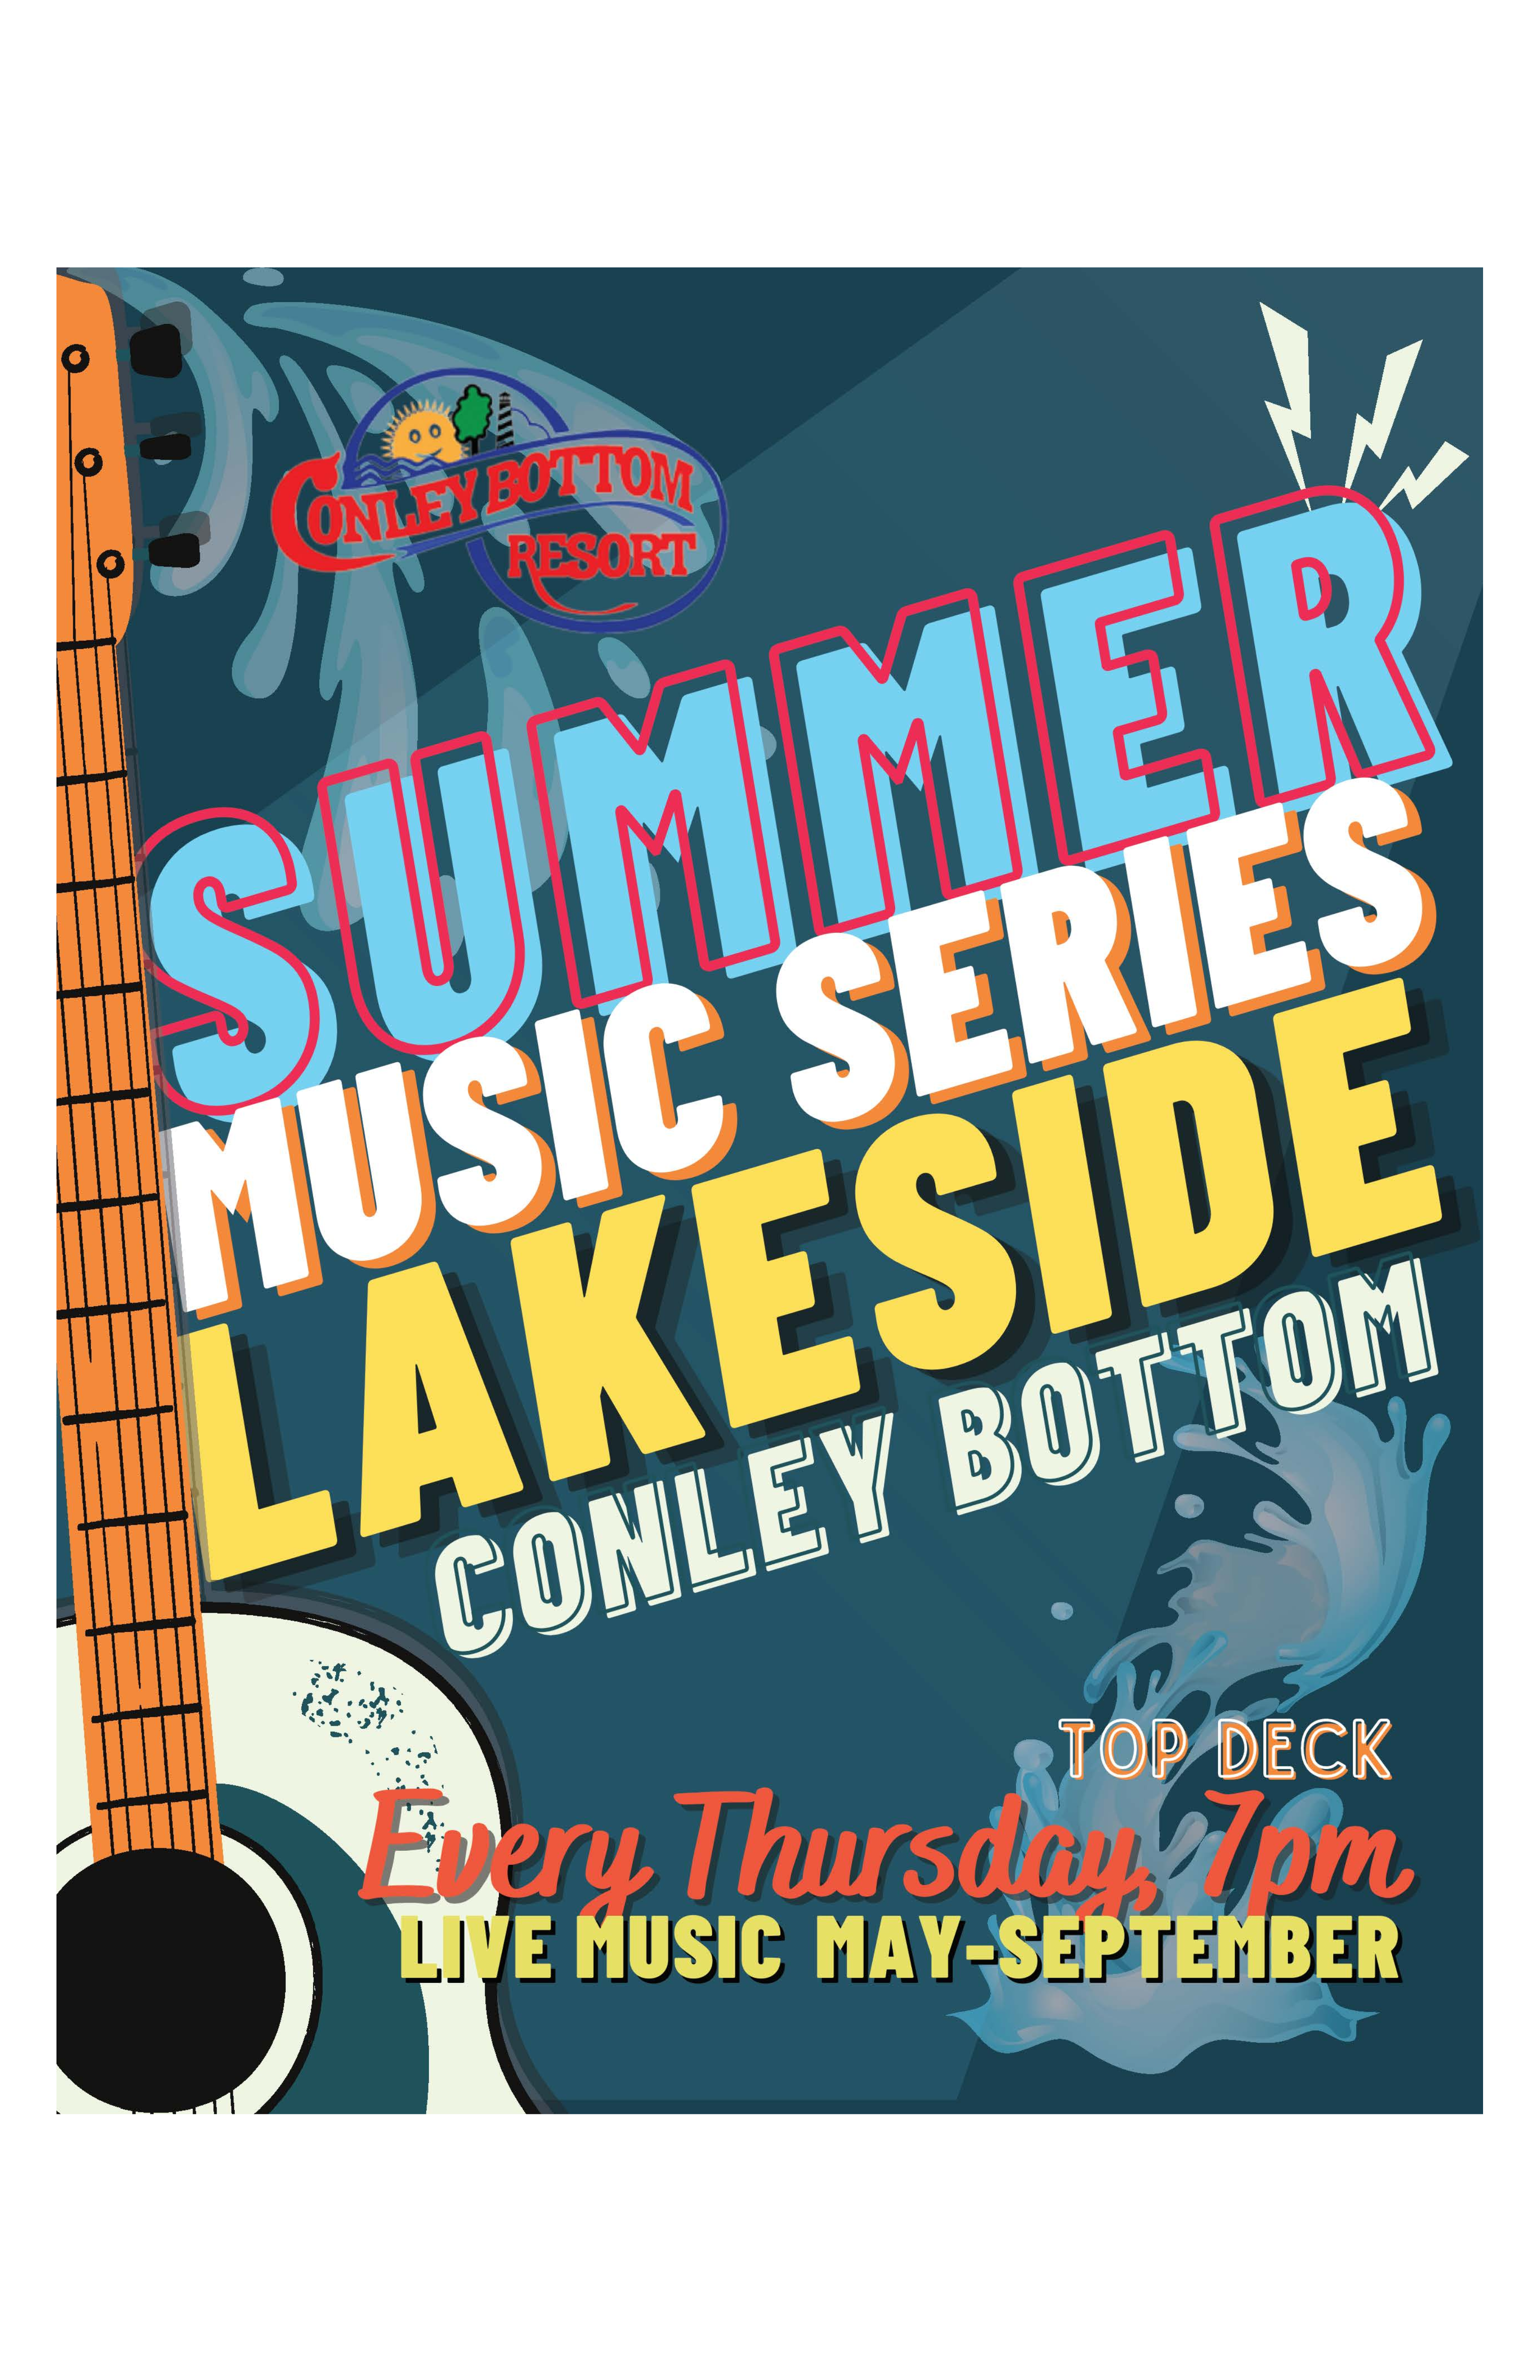 Join us for the Lakeside Summer Series!